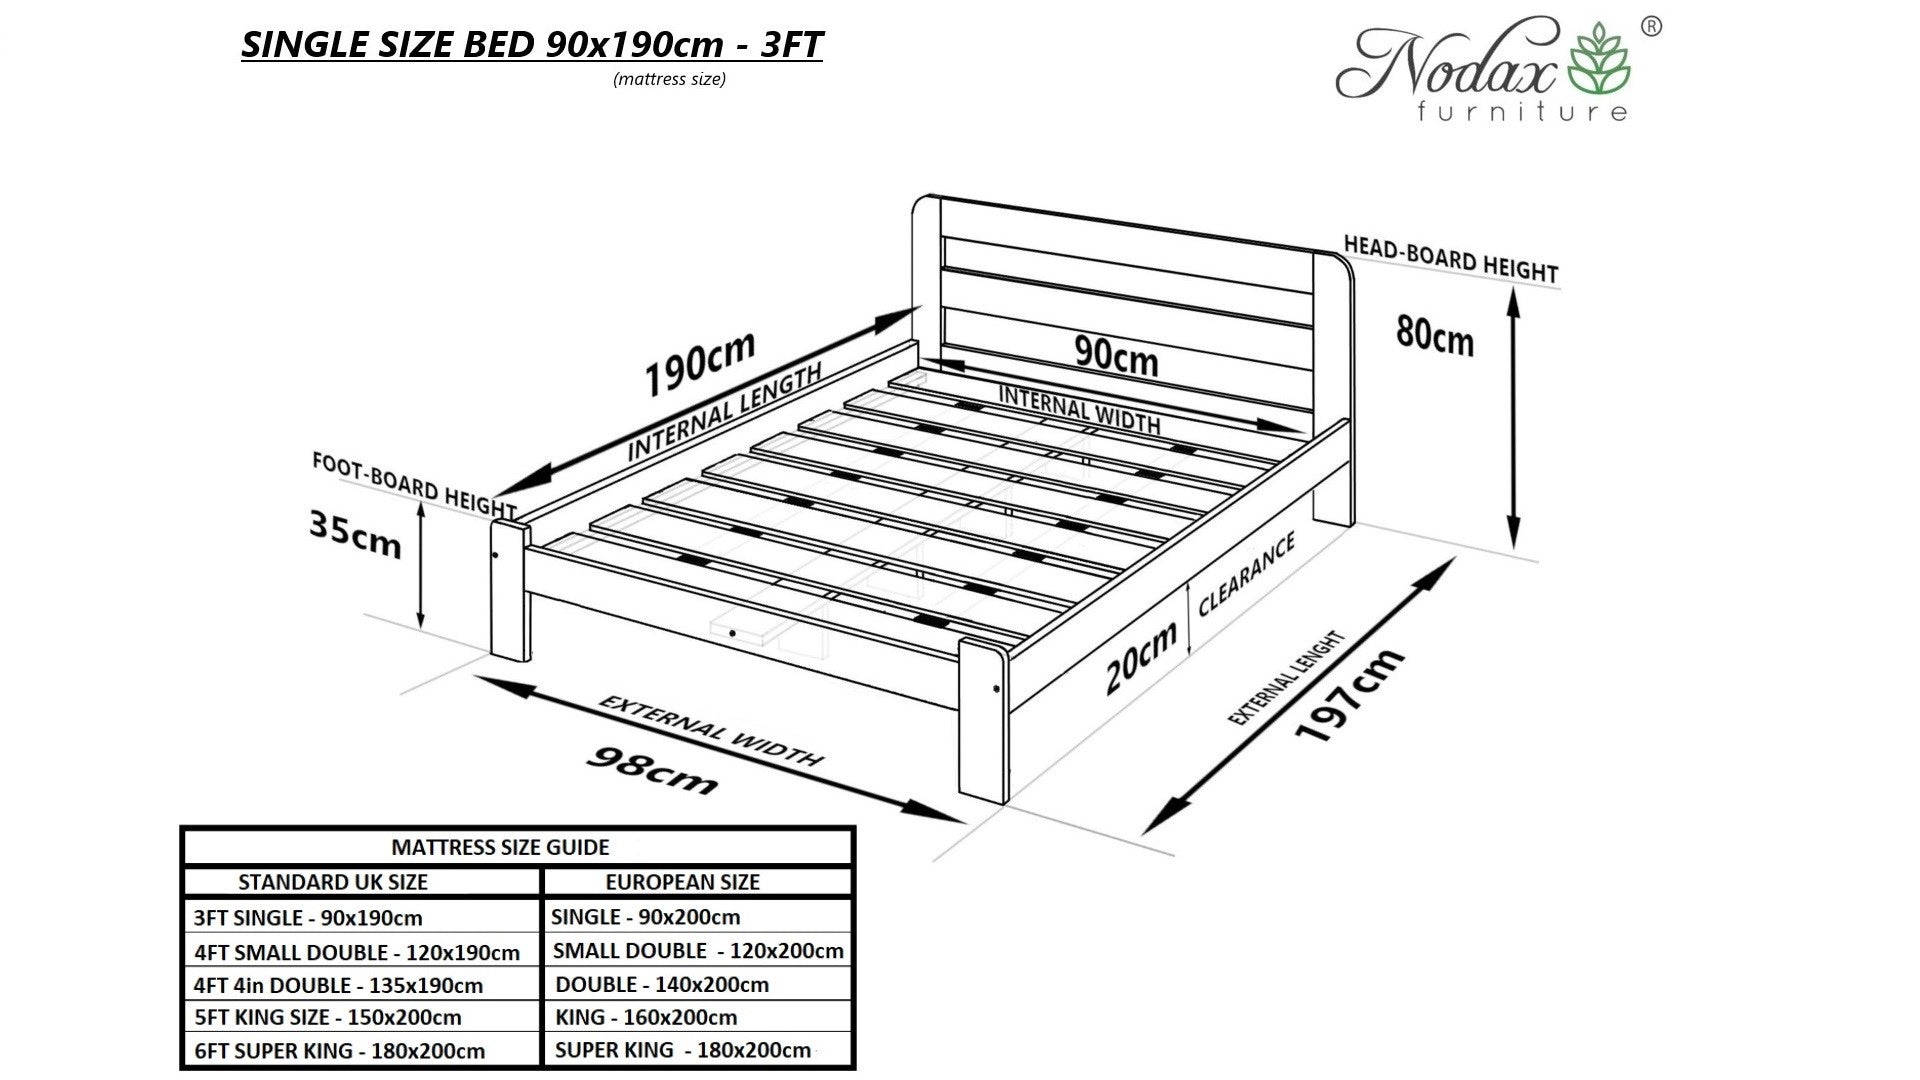 Wooden-bed-online-dimensions-3ft